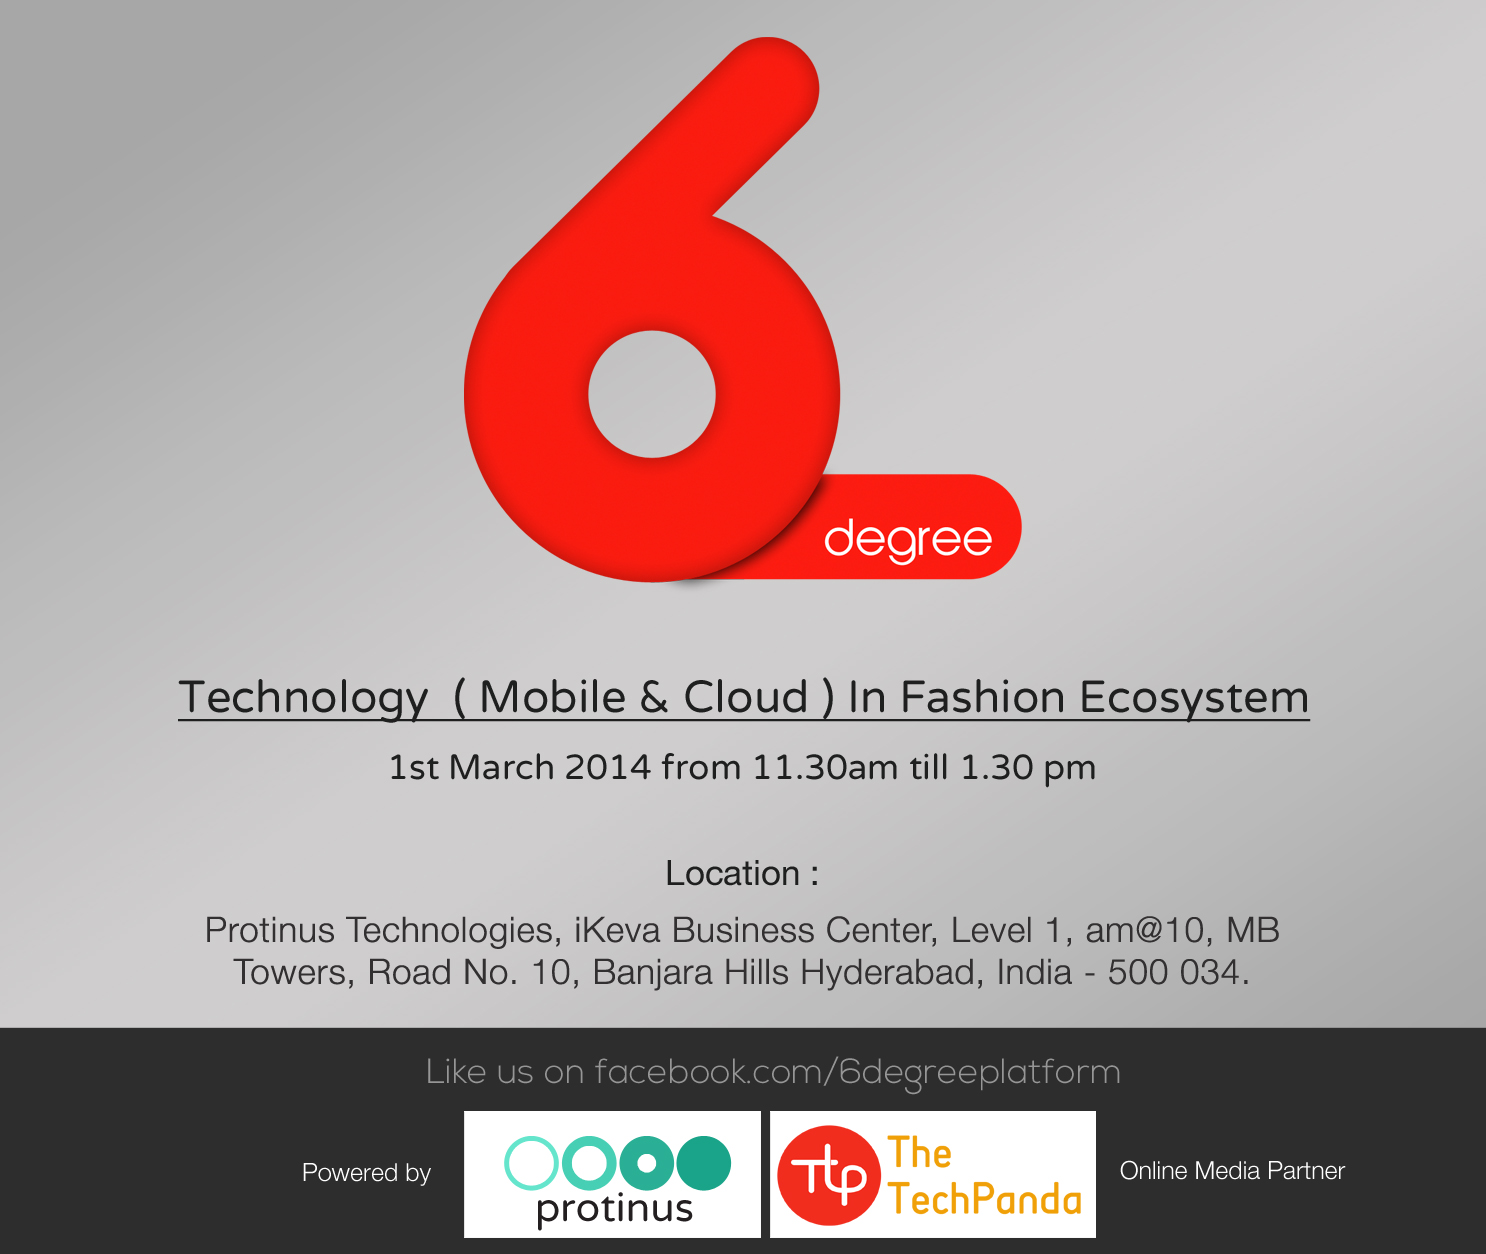 Technology (Mobile & Cloud) in Fashion - A Hyderabad Event by Protinus Technologies on March 1st